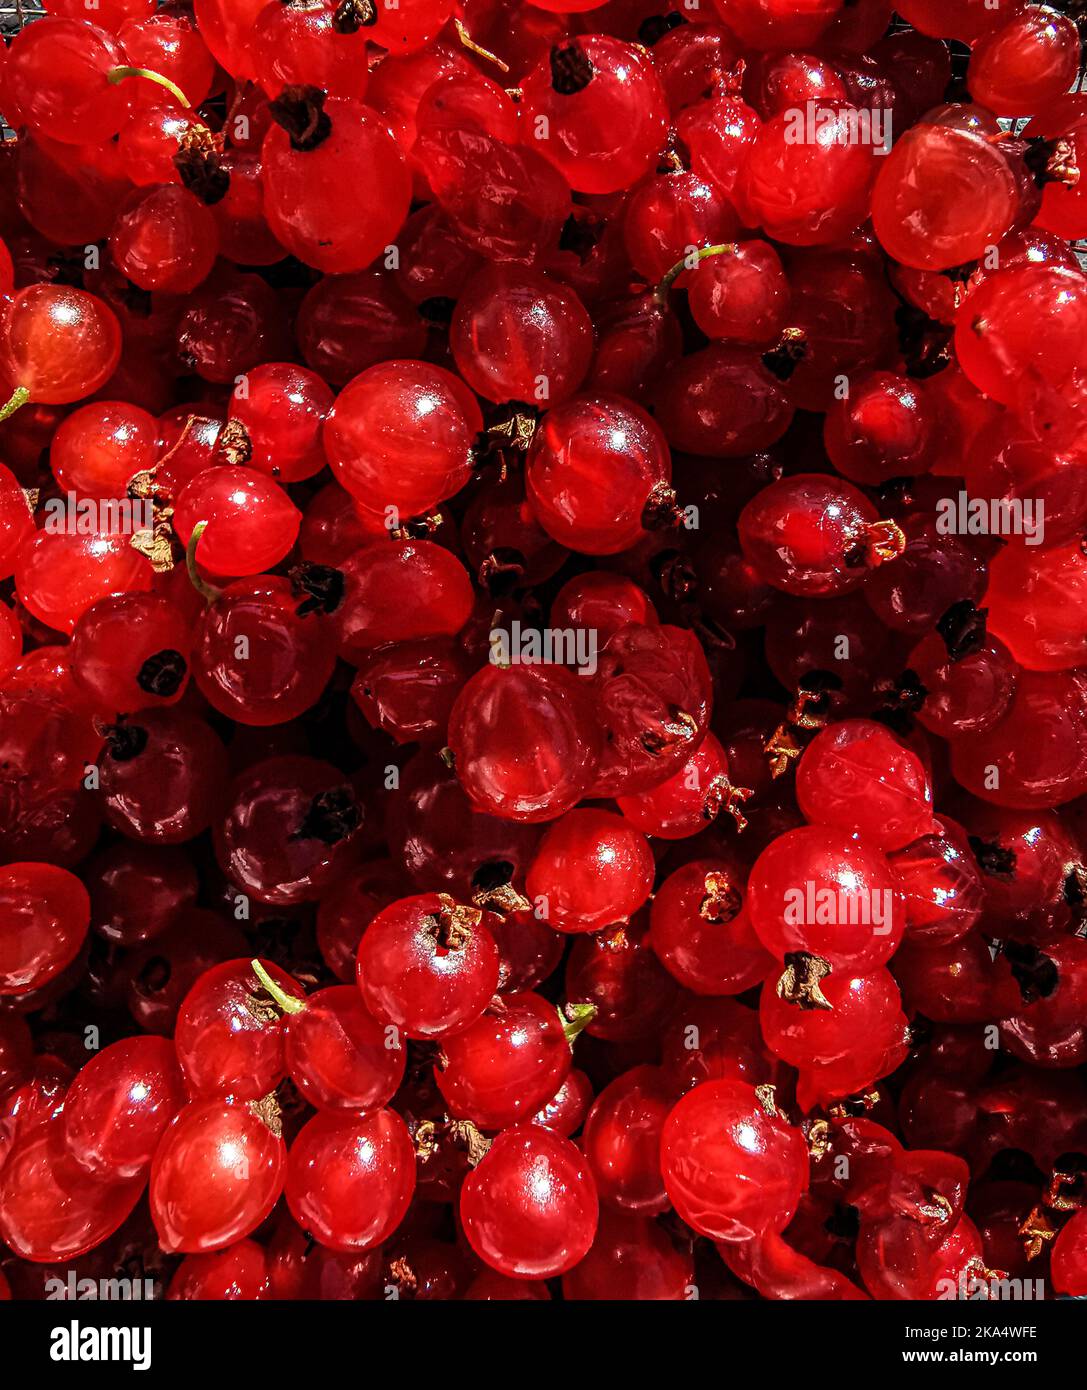 Full frame close-up of redcurrants Stock Photo